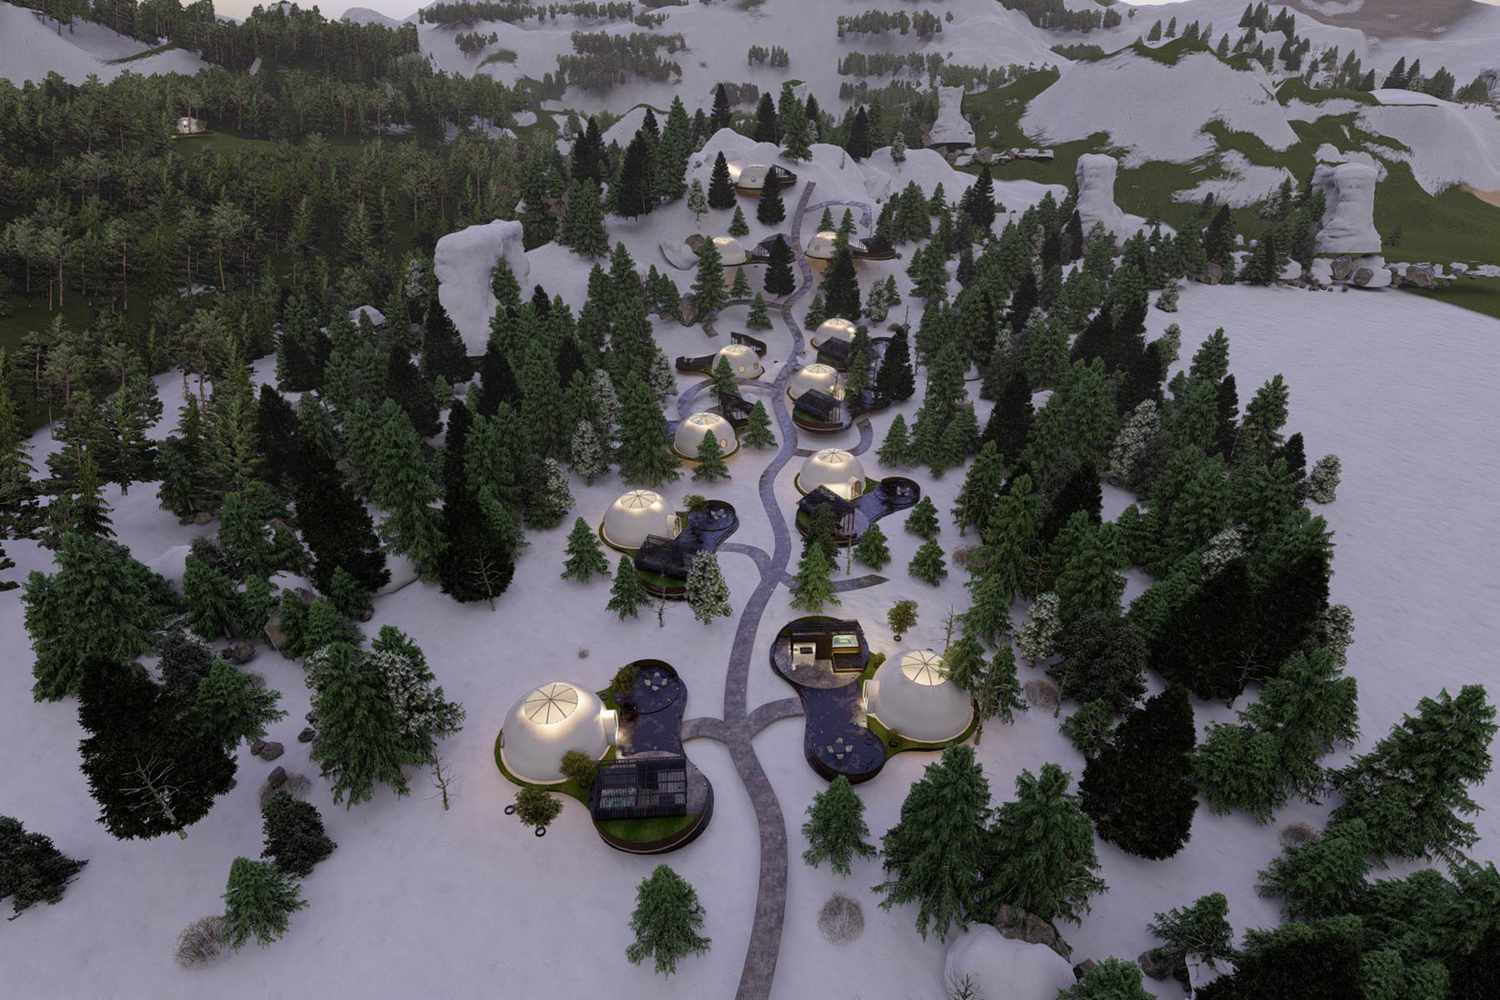  These Stargazing Domes in Washington's Cascade Mountains Have 15-foot-wide Skylights and Heated Decks With Private Saunas and Hot Tubs 